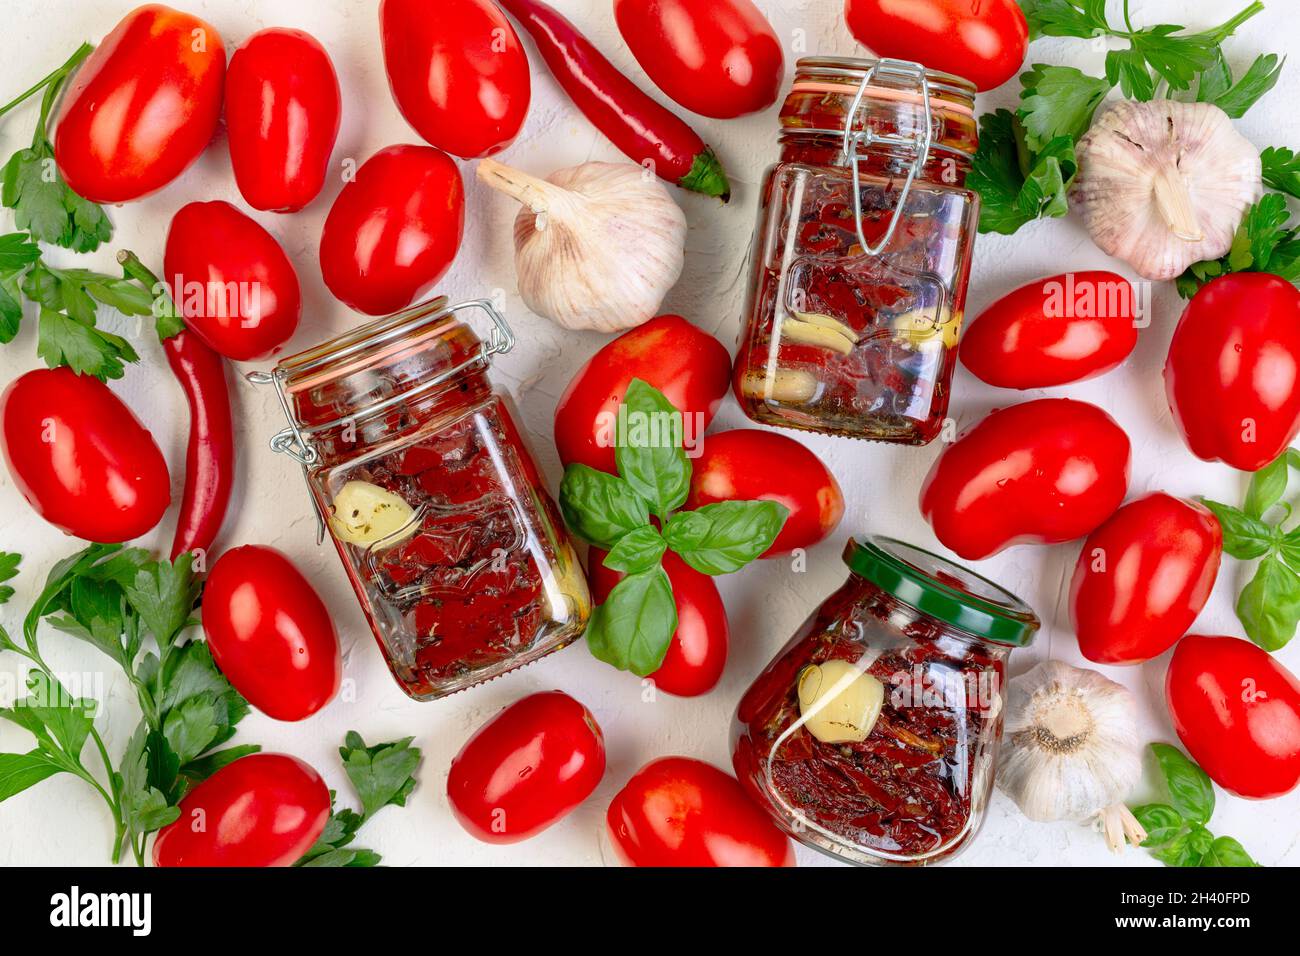 Dried tomatoes in olive oil. Stock Photo